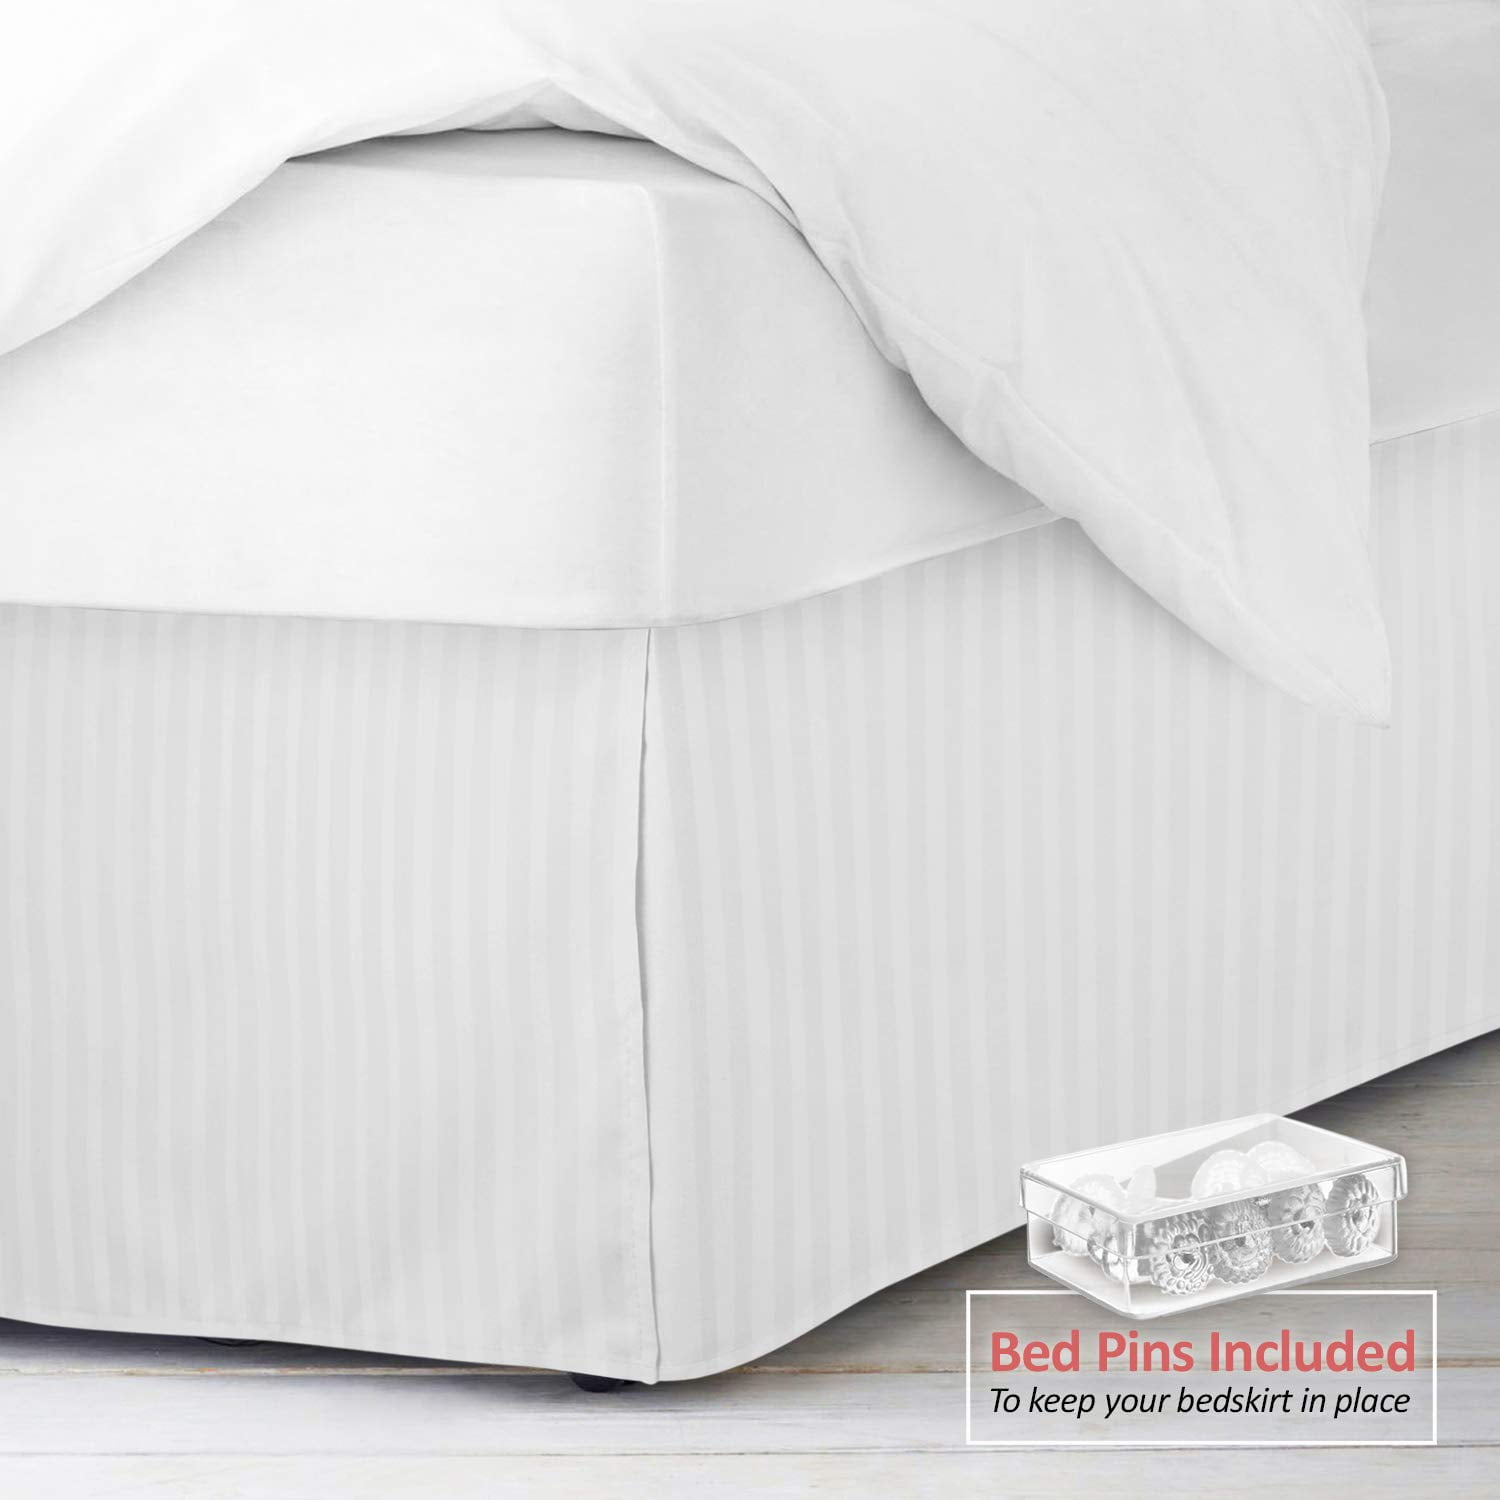 Details about   Fabulous Bedding Egyptian Cotton Drop Length Bed Skirt US Queen Size All Striped